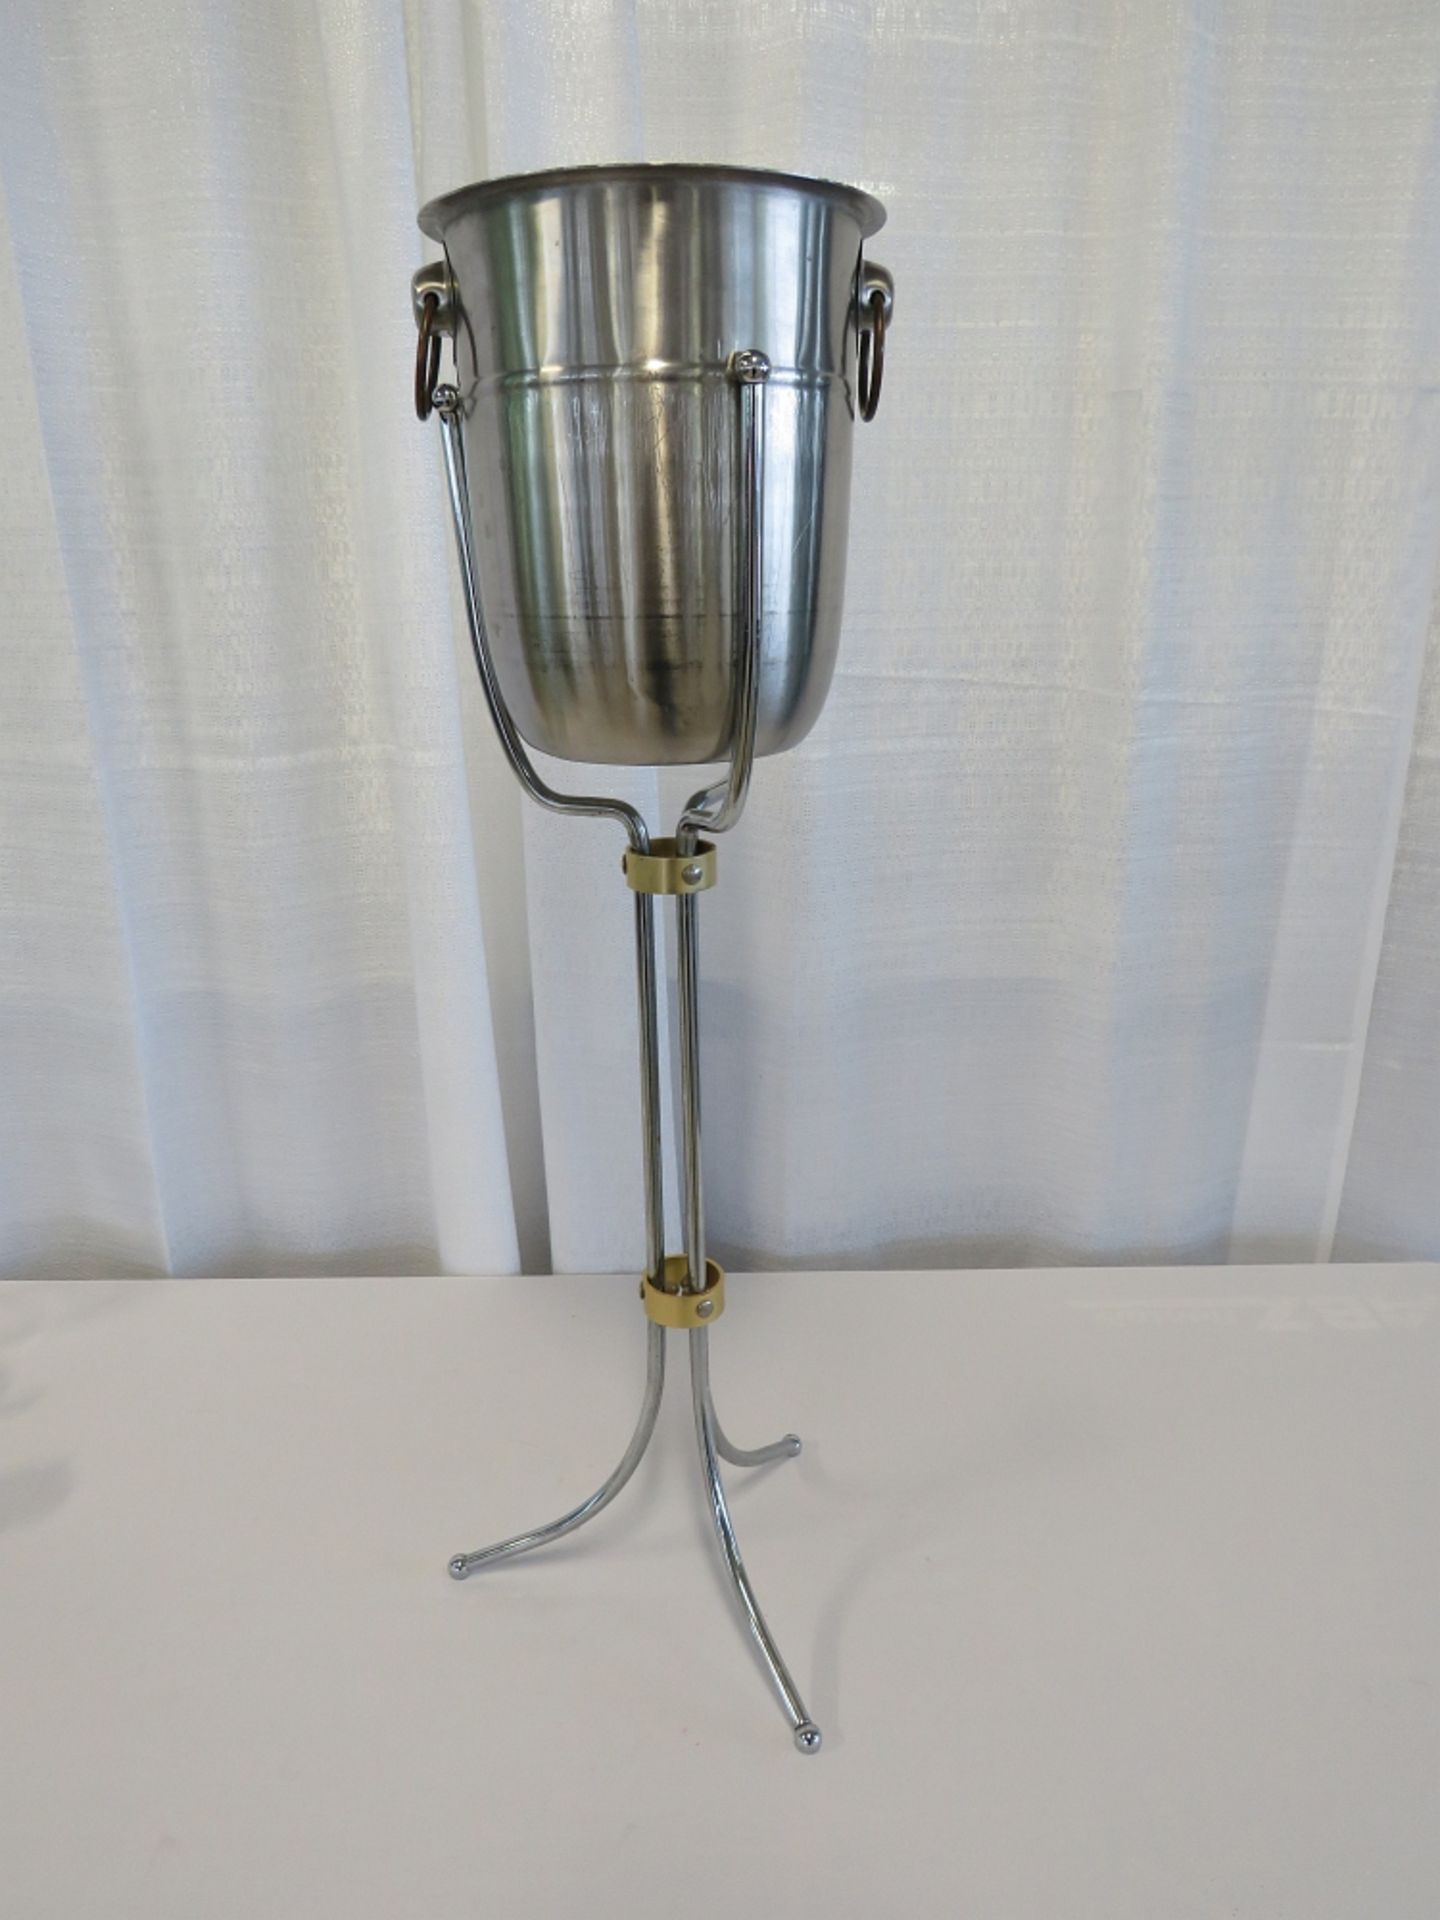 Champagne Bucket w/ Stand